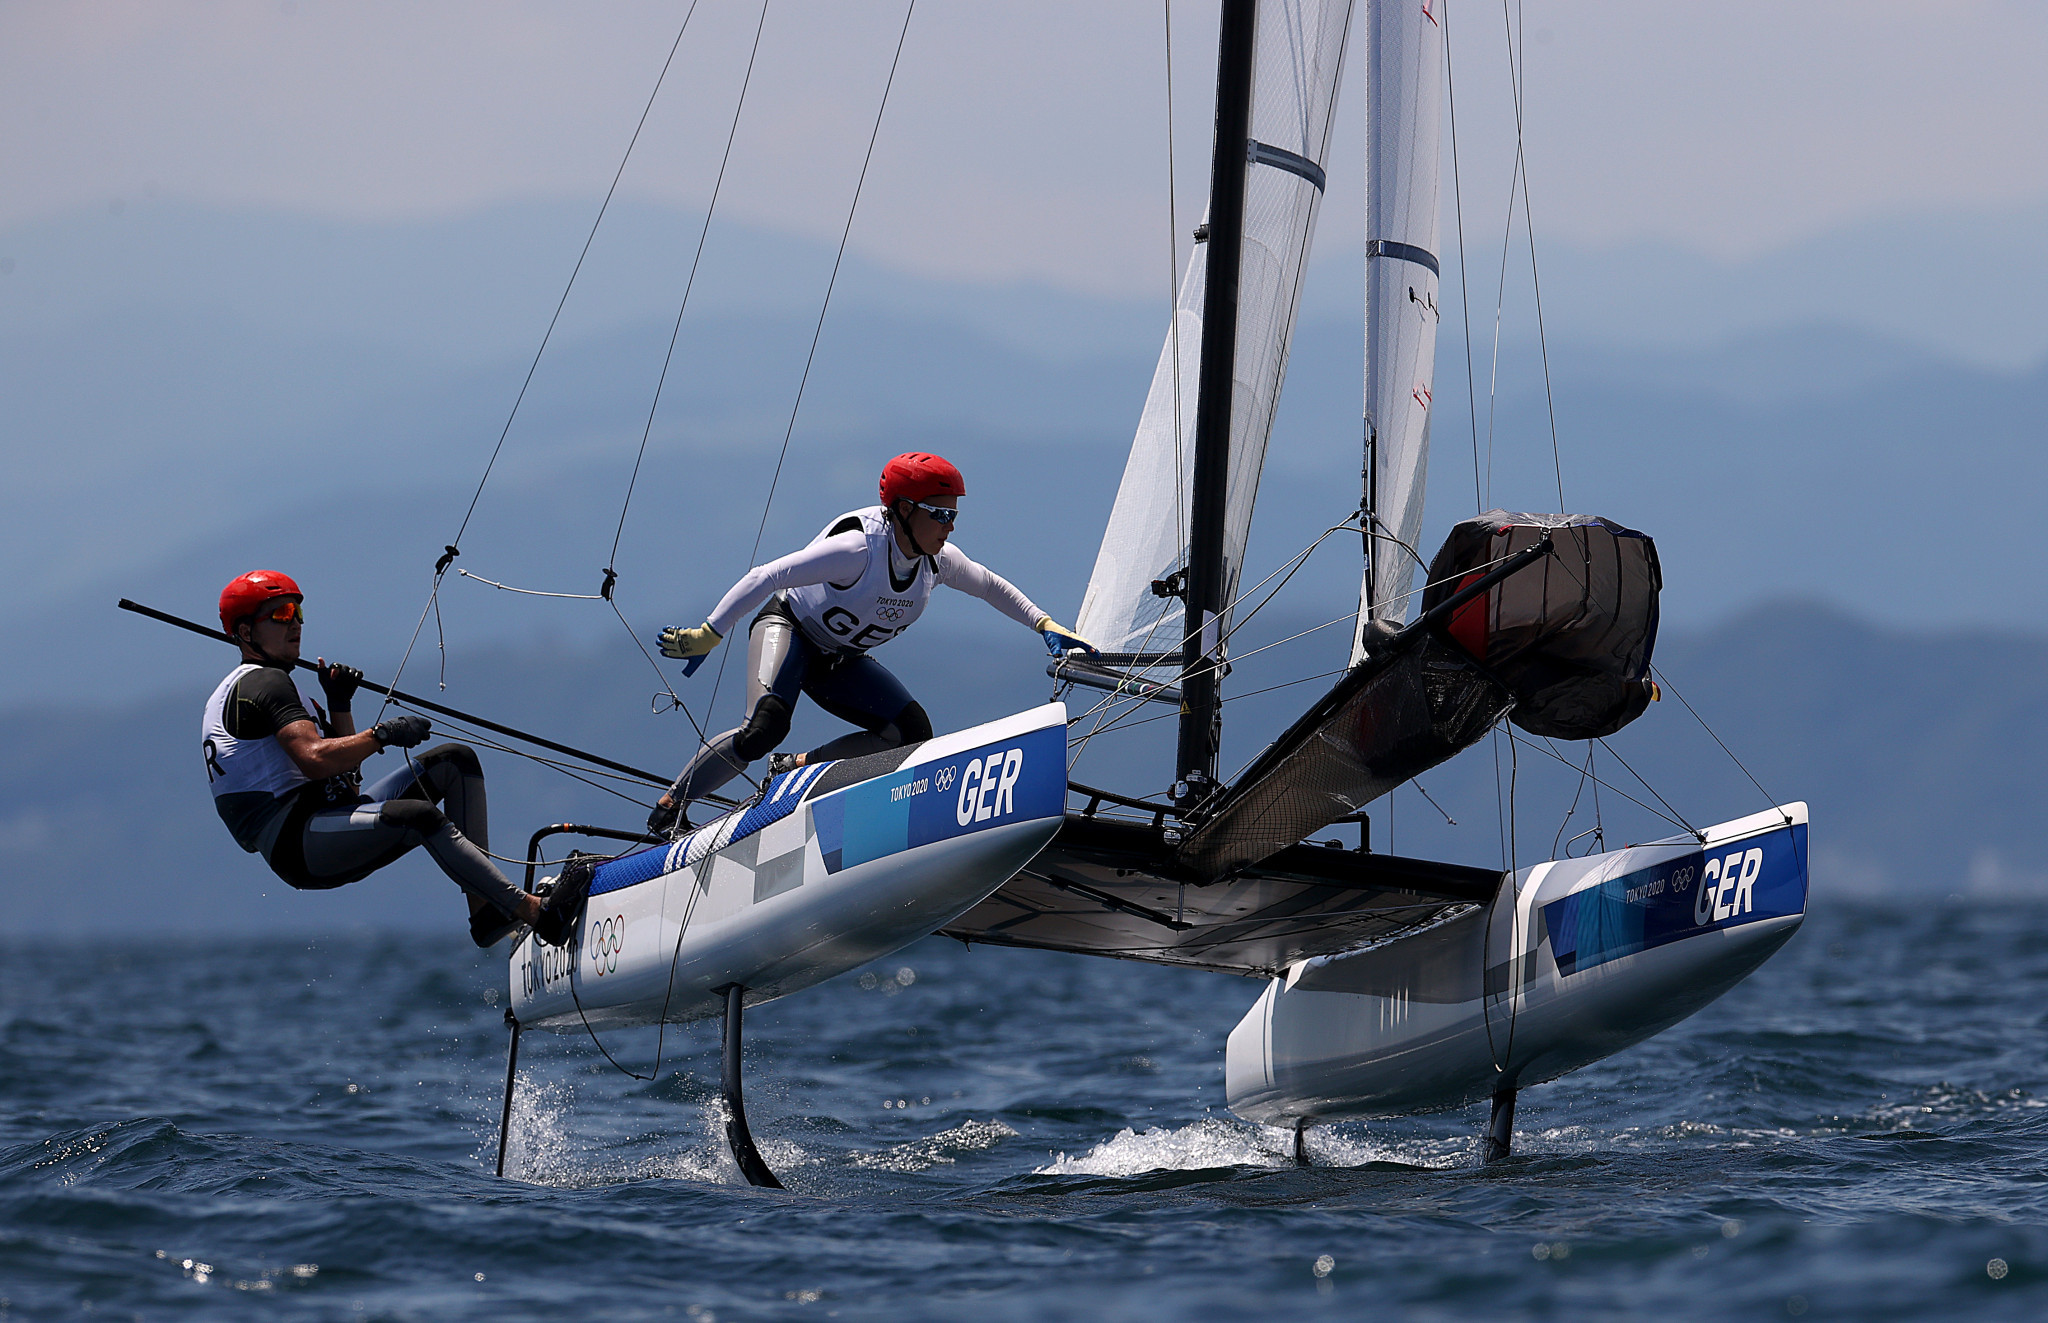 Germany's Nacra 17 bronze medallists Paul Kohlhoff and Alicia Stuhlemmer are in second place at the World Championships ©Getty Images